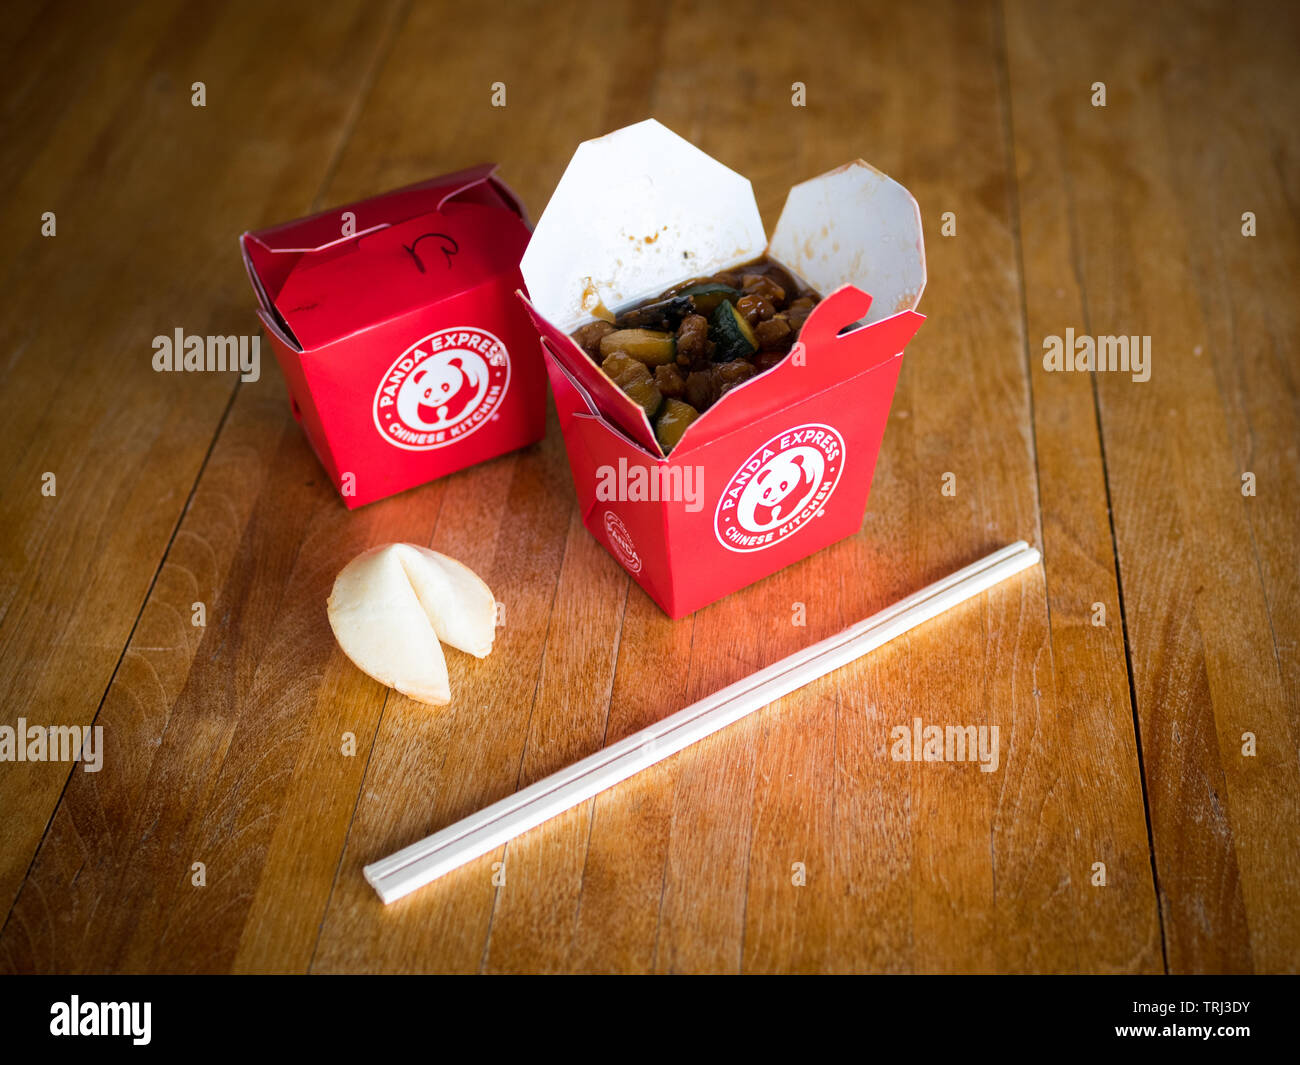 Takeout boxes of kung pao chicken from Panda Express restaurant, a fortune cookie, and chopstocks. Stock Photo